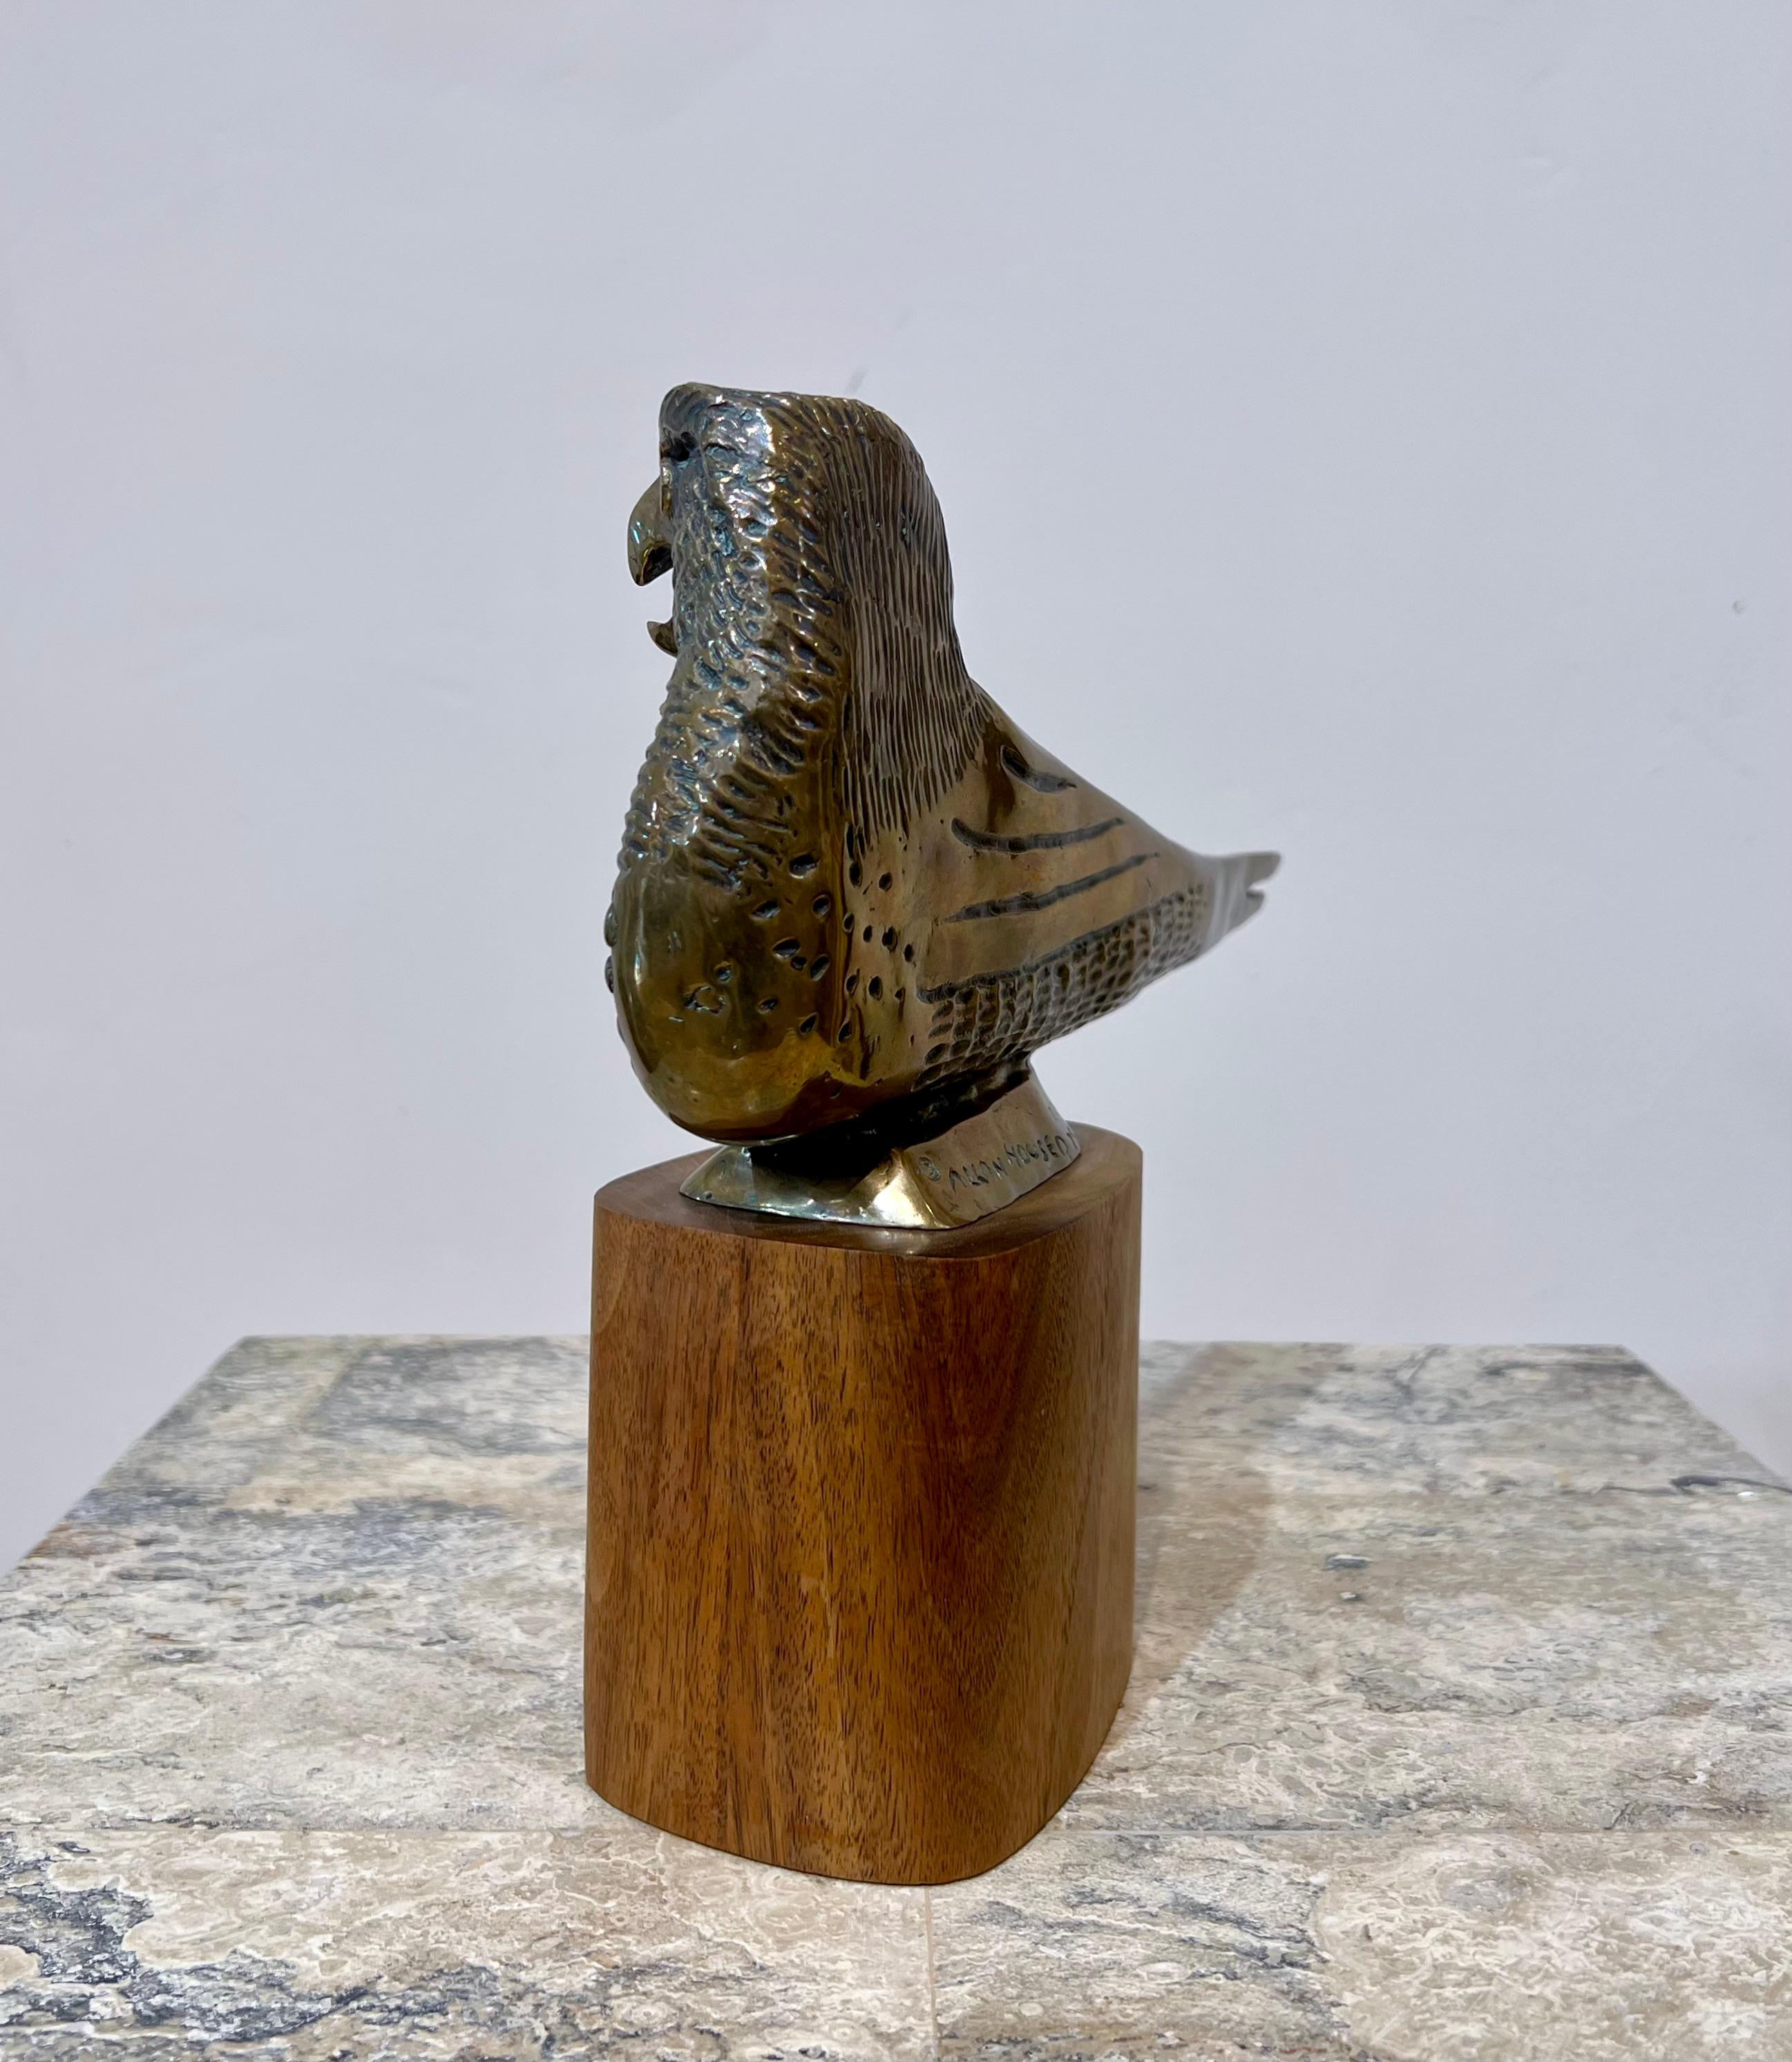 Sparrow Hawk, bronze, sculpture, by Allan Houser, bird, limited edition, gold

GLENN GREEN GALLERIES' LONG ASSOCIATION WITH ALLAN HOUSER

Allan Houser was represented by Glenn Green Galleries (formerly known as The Gallery Wall, Inc.) from 1973